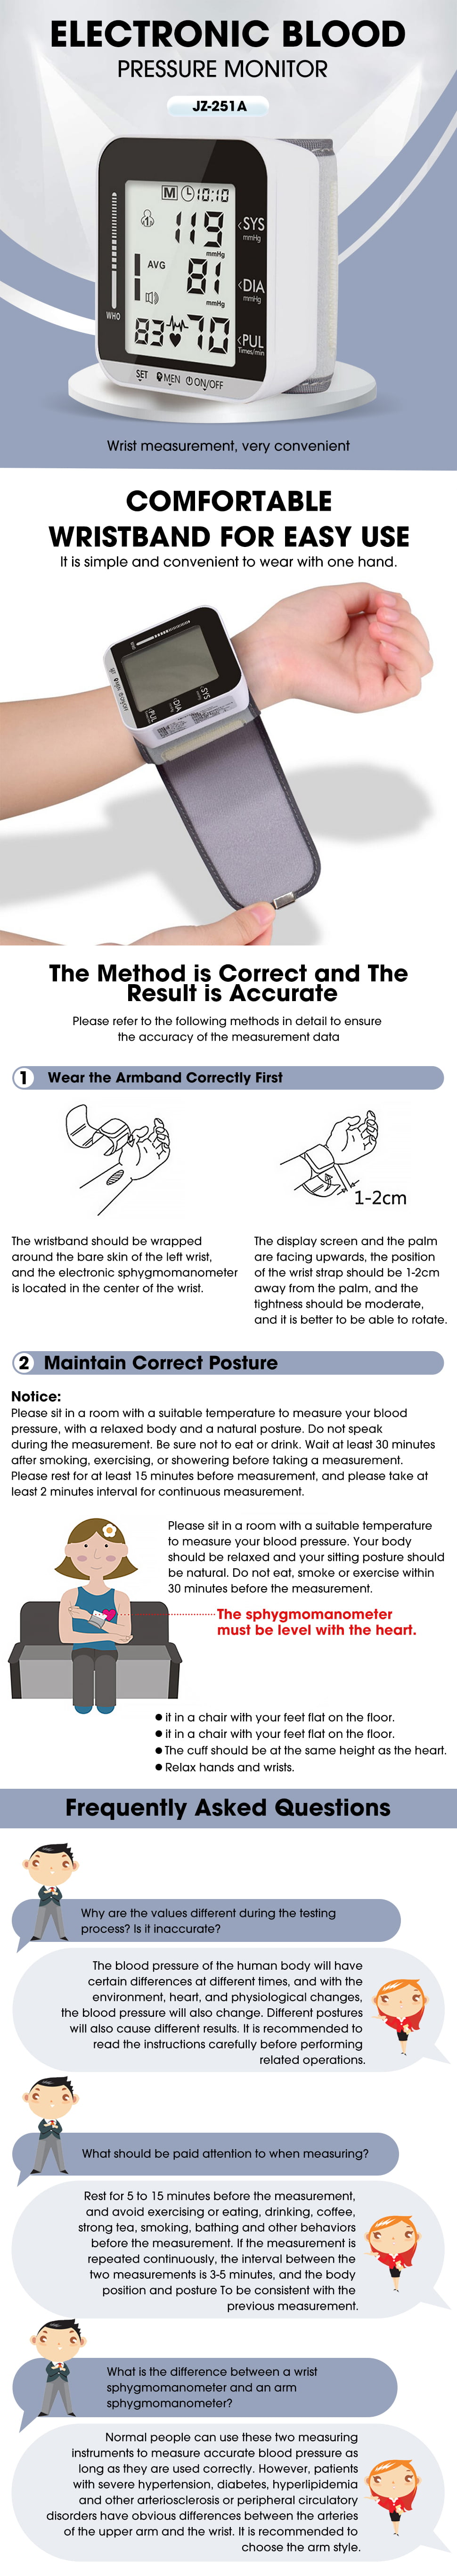 Automated Blood Pressure Cuff Use (UPDATED CORRECTED VERSION IN